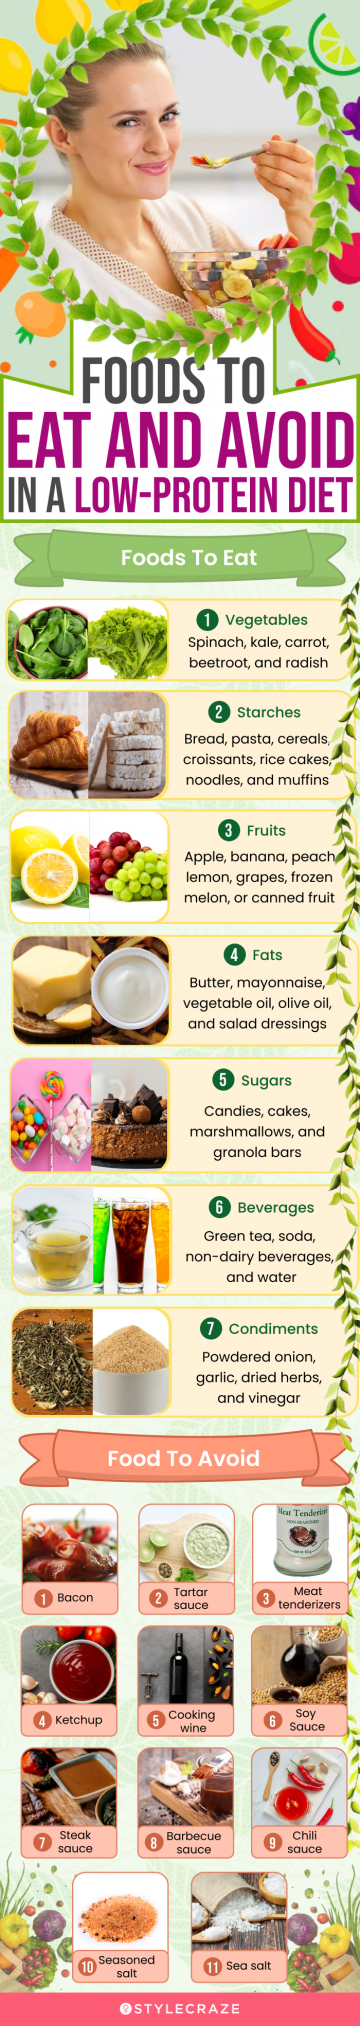 food to eat and avoid in a low protein diet (infographic)